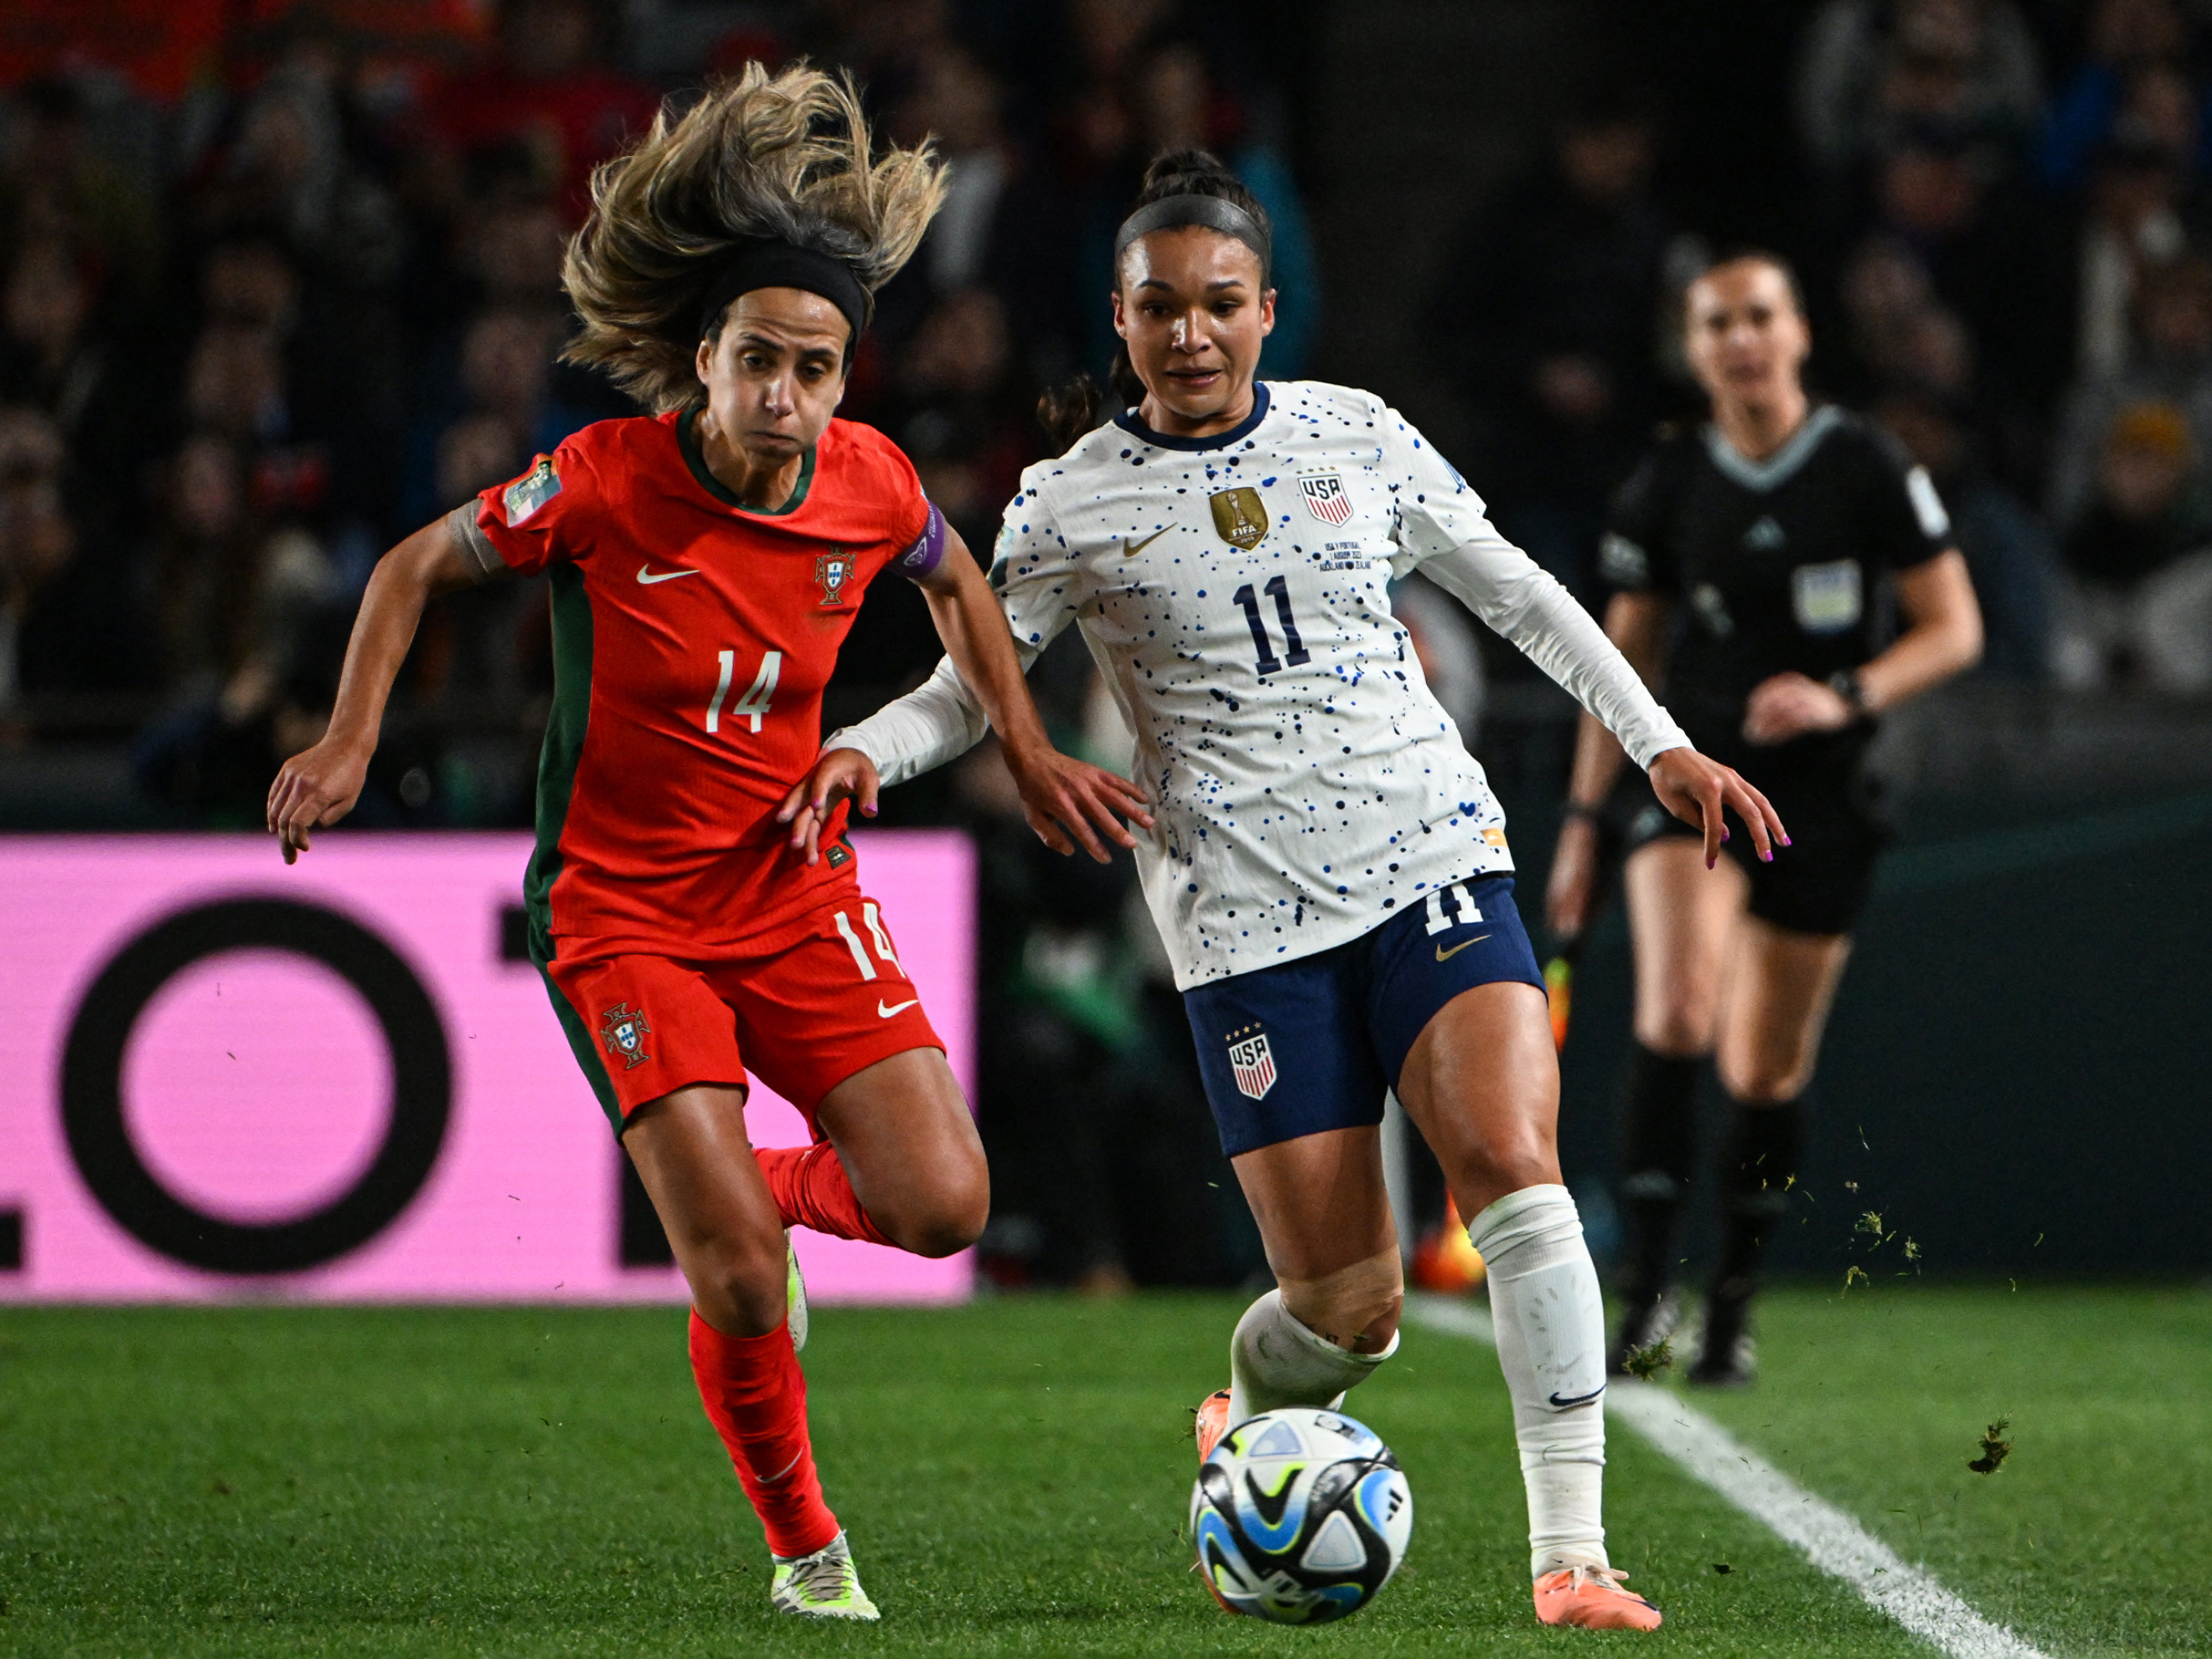 The US ties Portugal 0-0 to advance to the knockout round at Womens World Cup